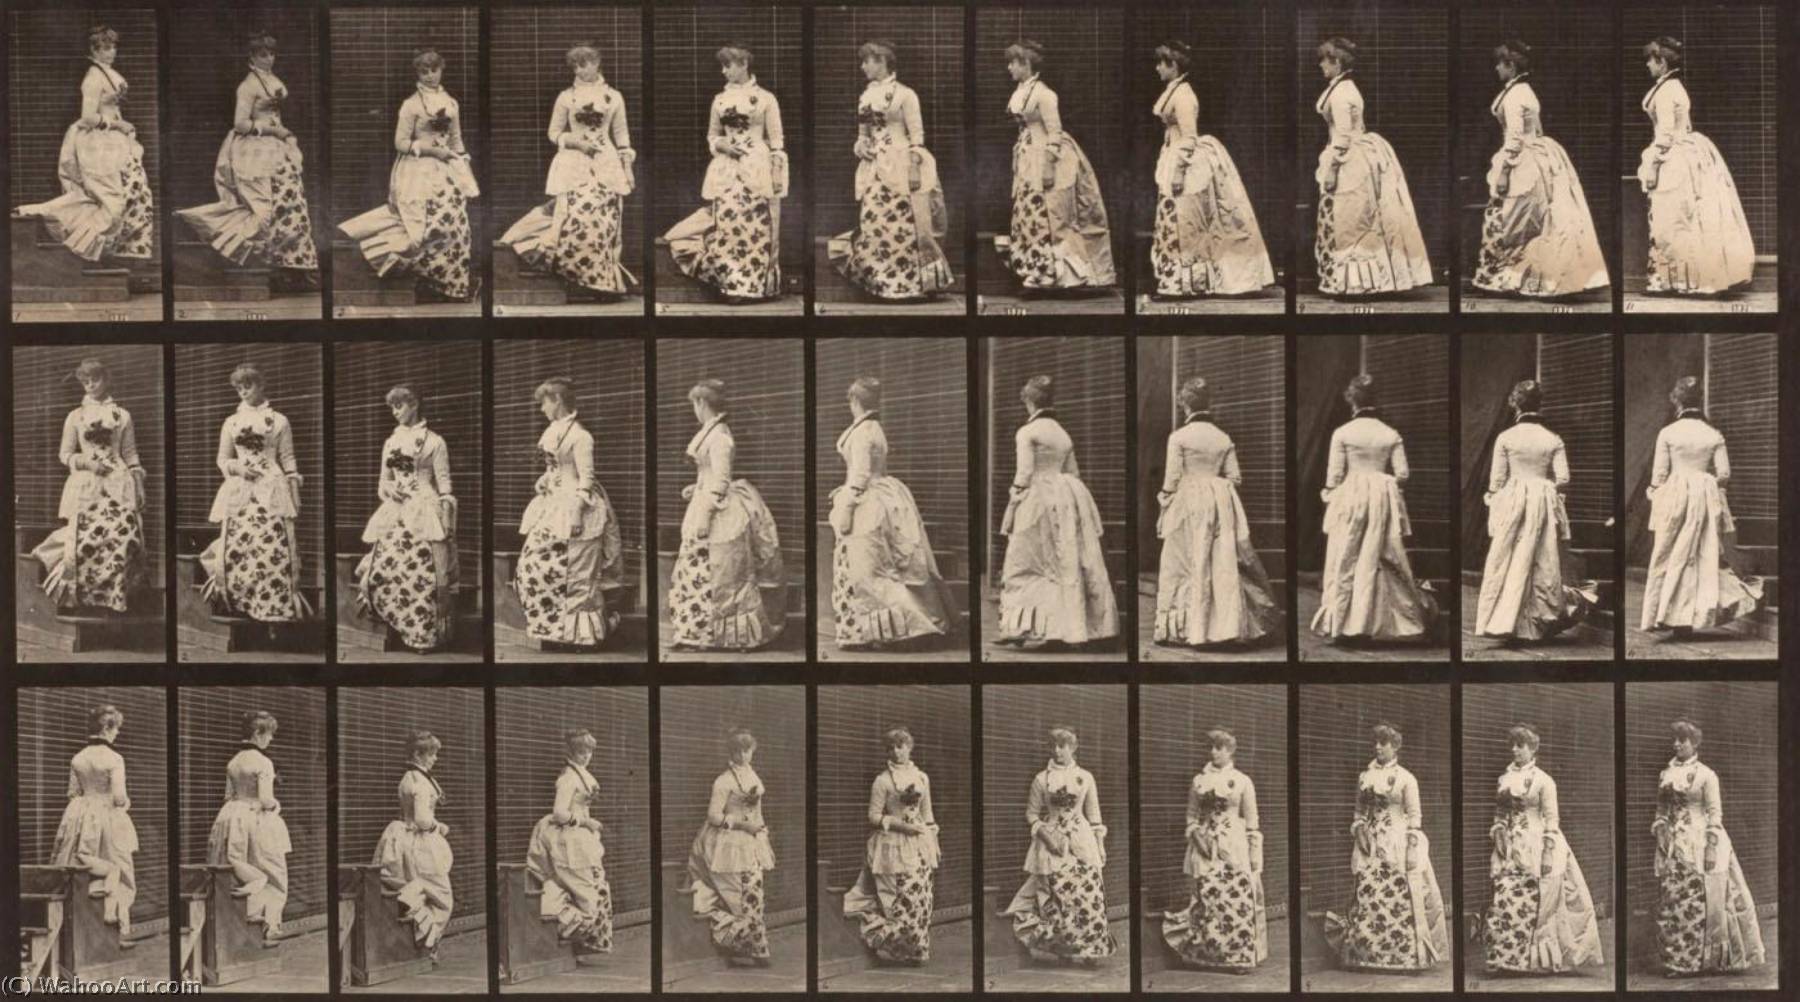 WikiOO.org - 백과 사전 - 회화, 삽화 Eadweard Muybridge - Descending Stairs and Turning, from the book Animal Locomotion